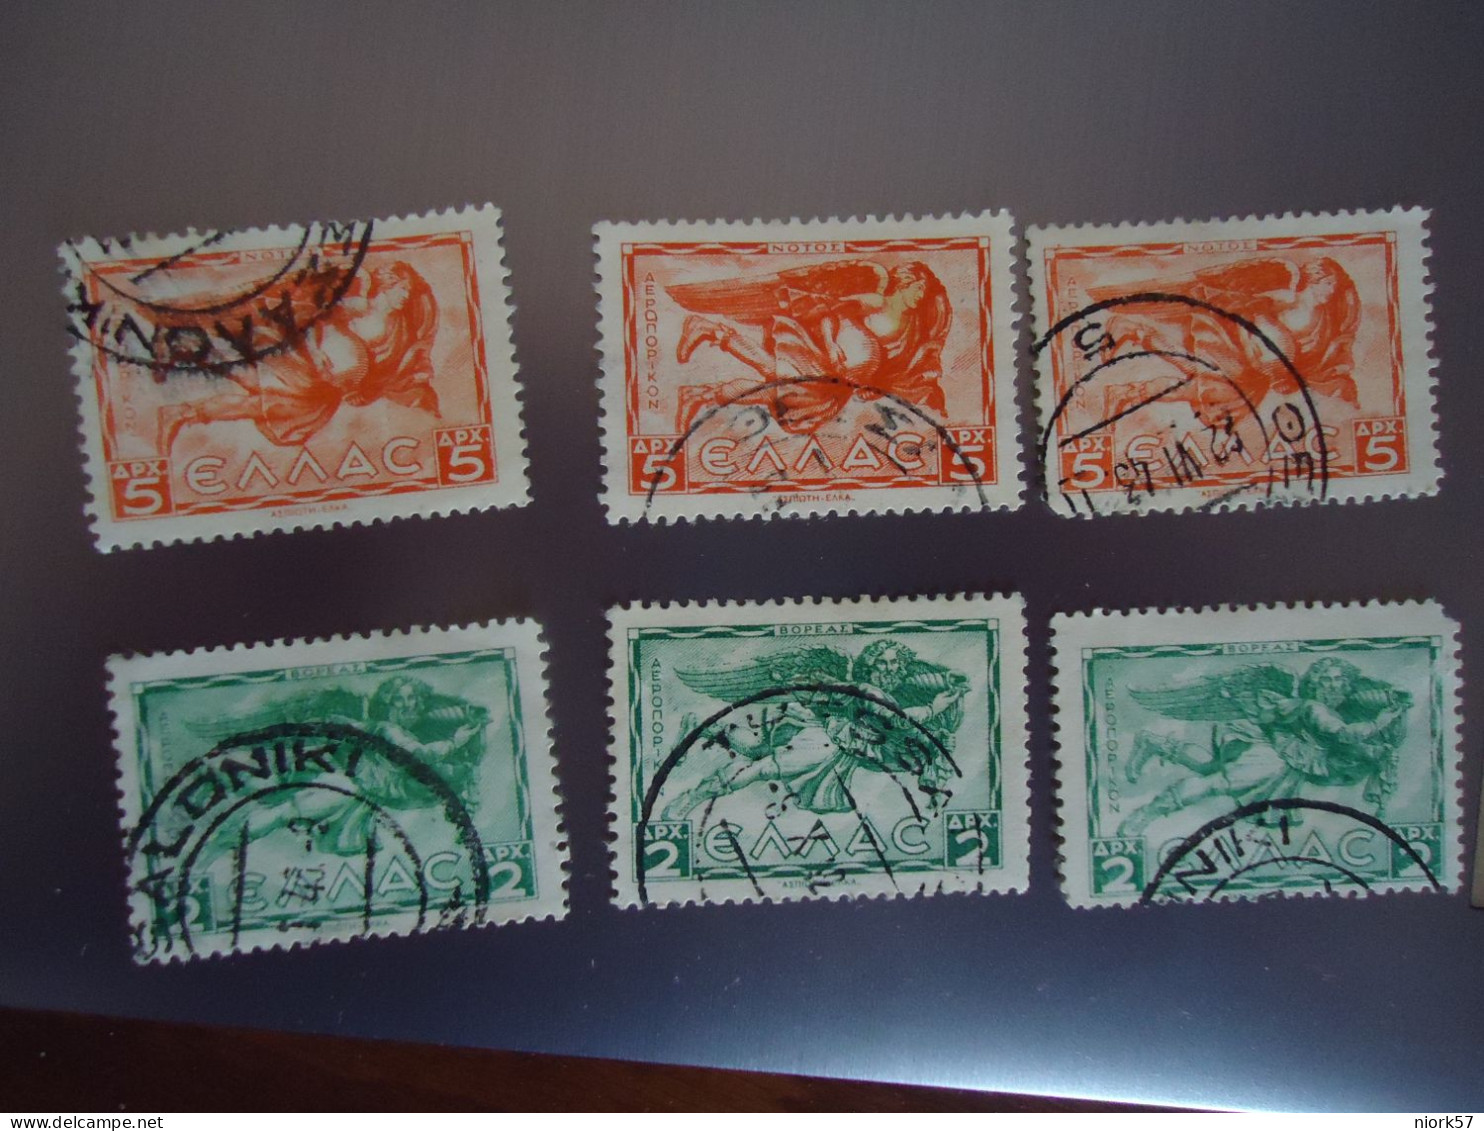 GREECE  USED  6 STAMPS  1942-  AIR WINDS - Automaatzegels [ATM]